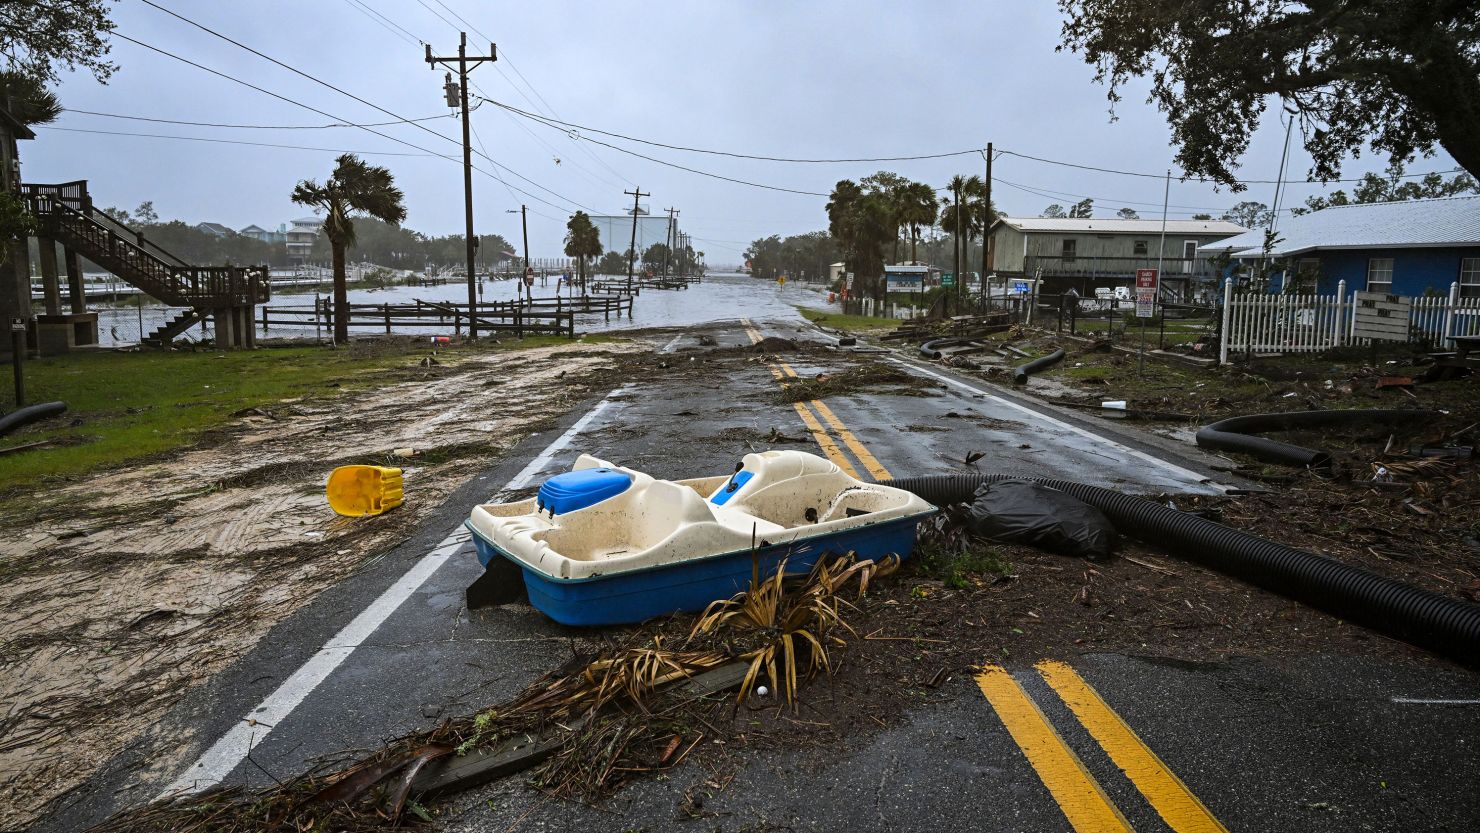 Idalia is the strongest storm to hit Florida's Big Bend region in more than 125 years.